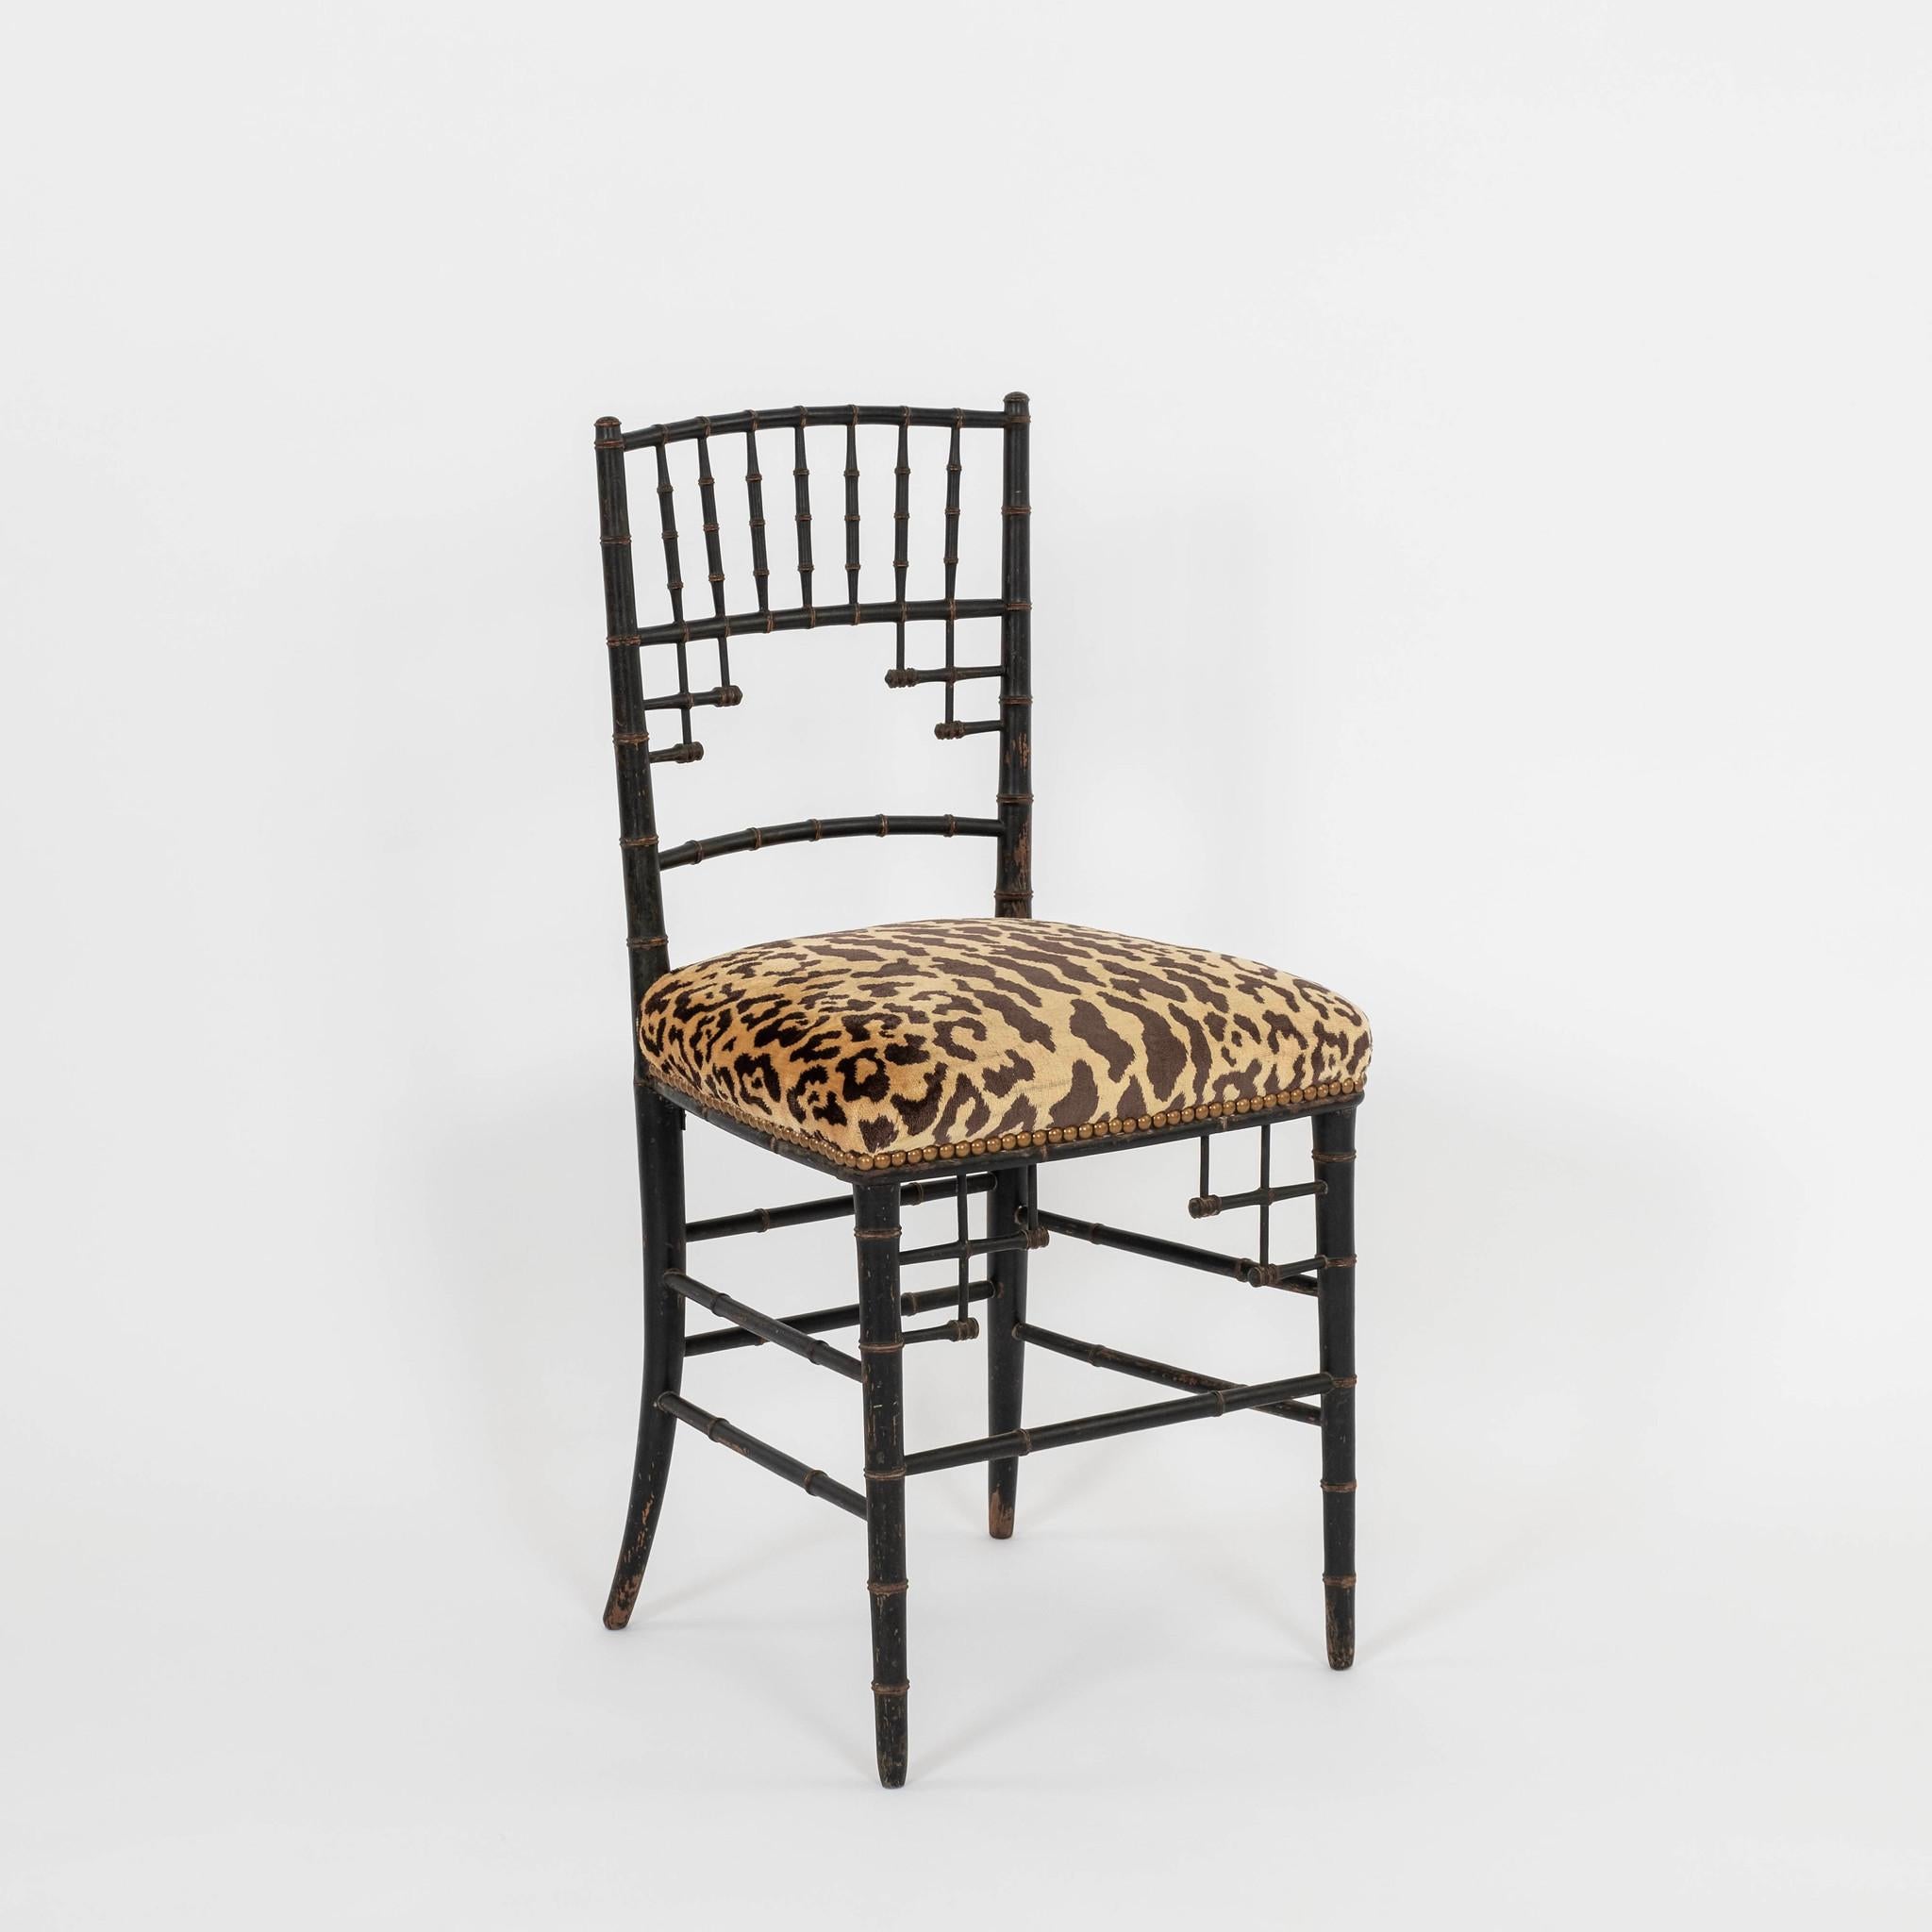 Exquisitely hand turned and carved period Napoleon III faux bamboo opera chairs upholstered in Leopardo silk velvet.